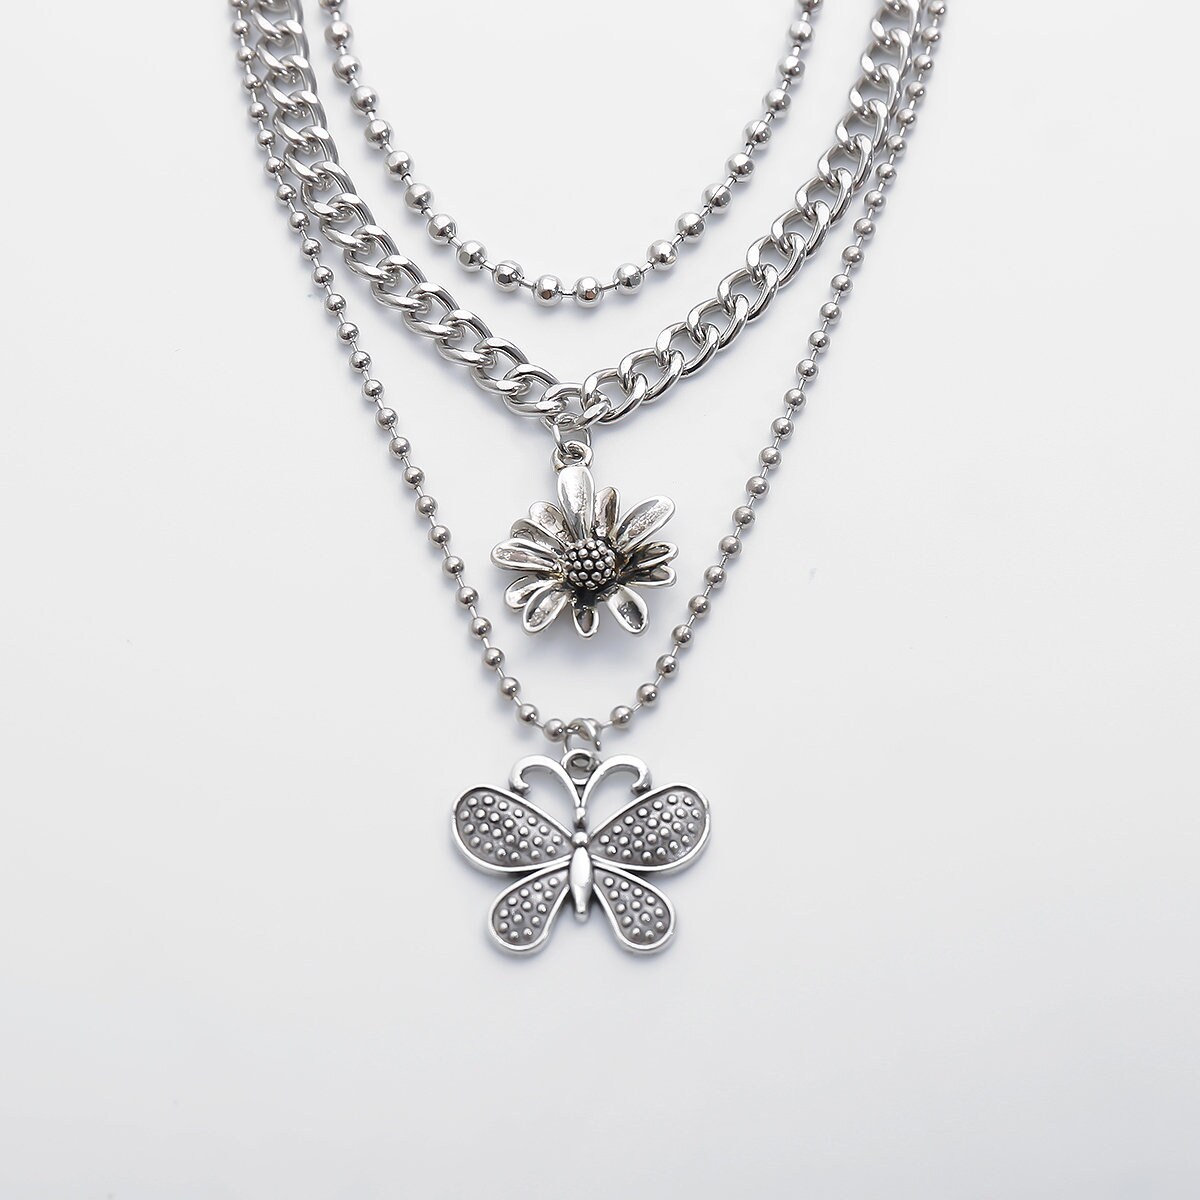 Download Multi-layer Vintage Daisy Flower & Butterfly Pendant ...